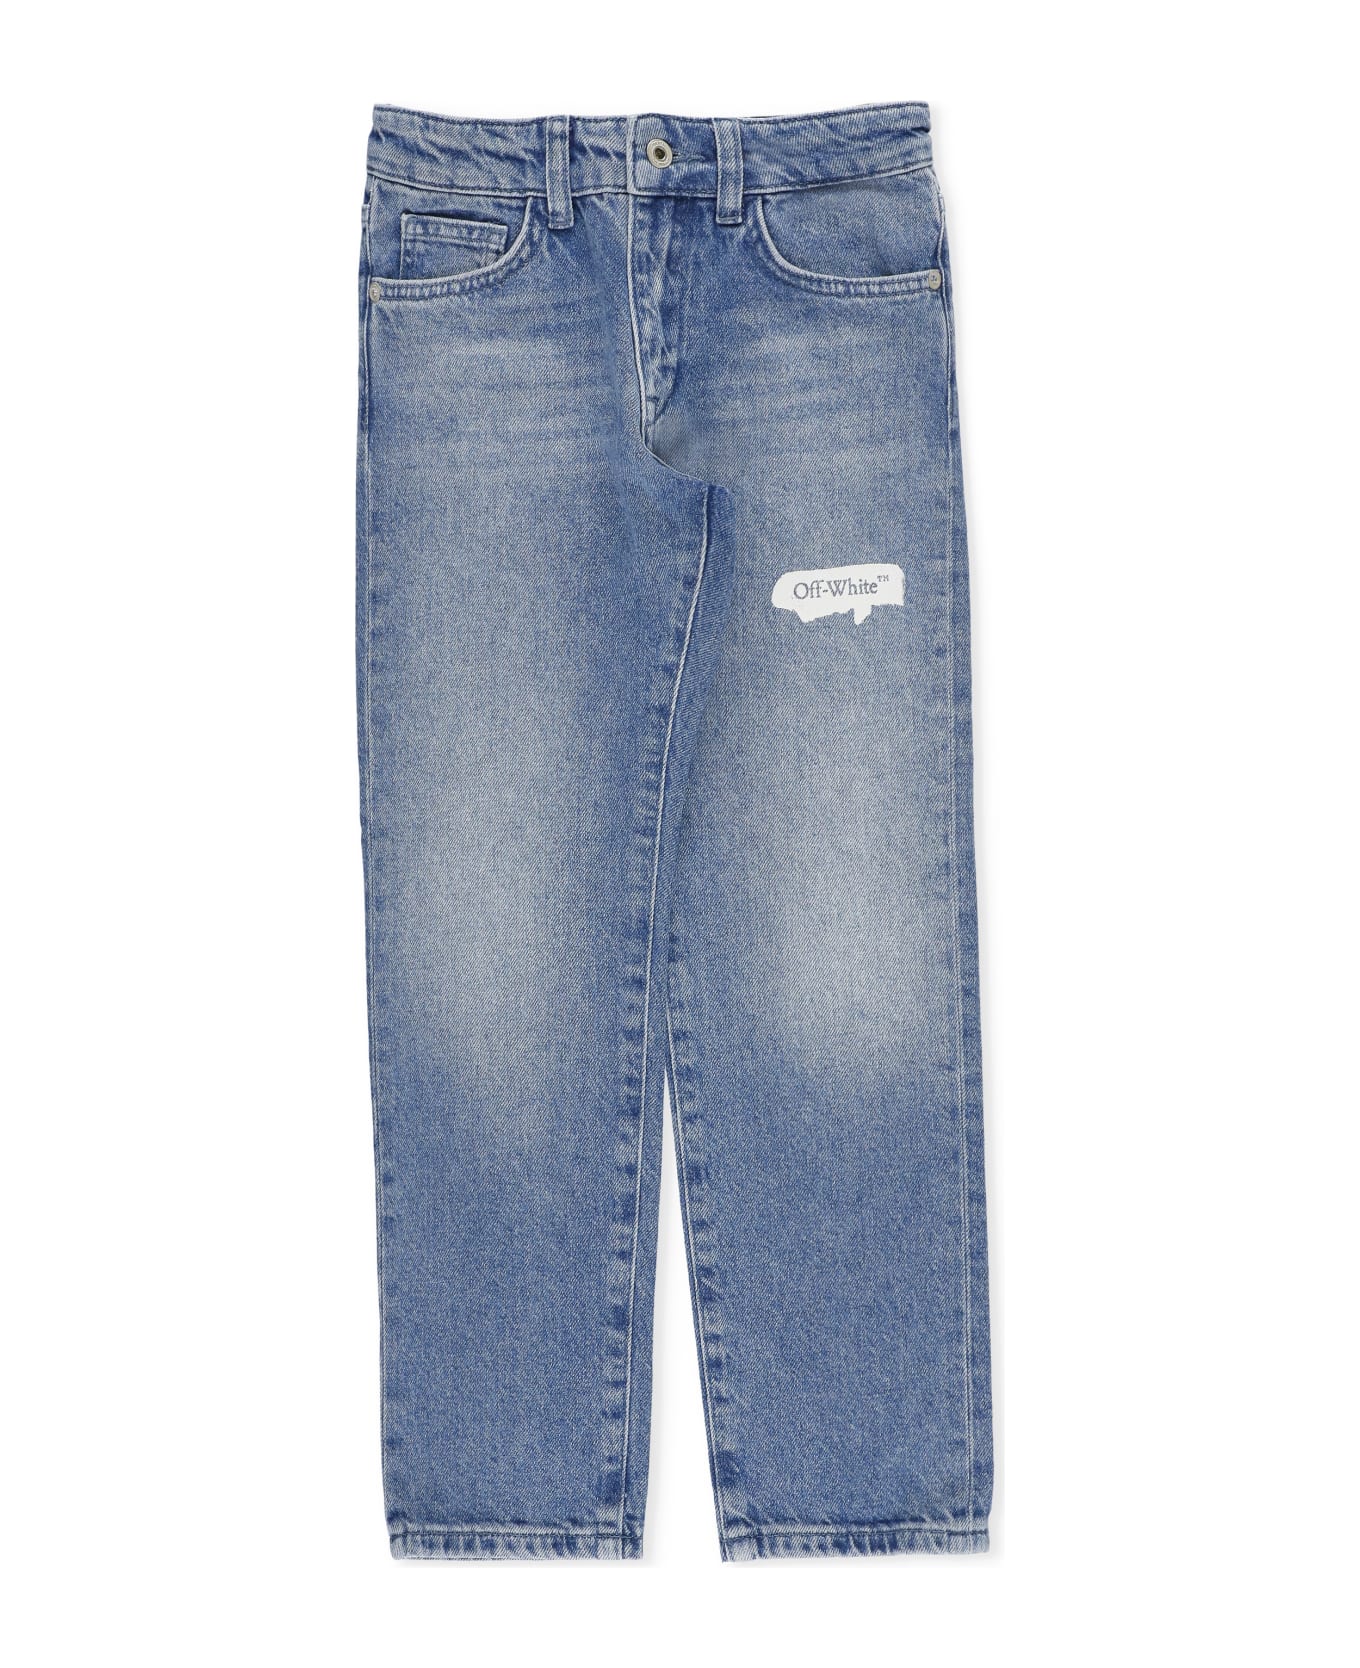 Off-White Cotton Jeans - Blue ボトムス